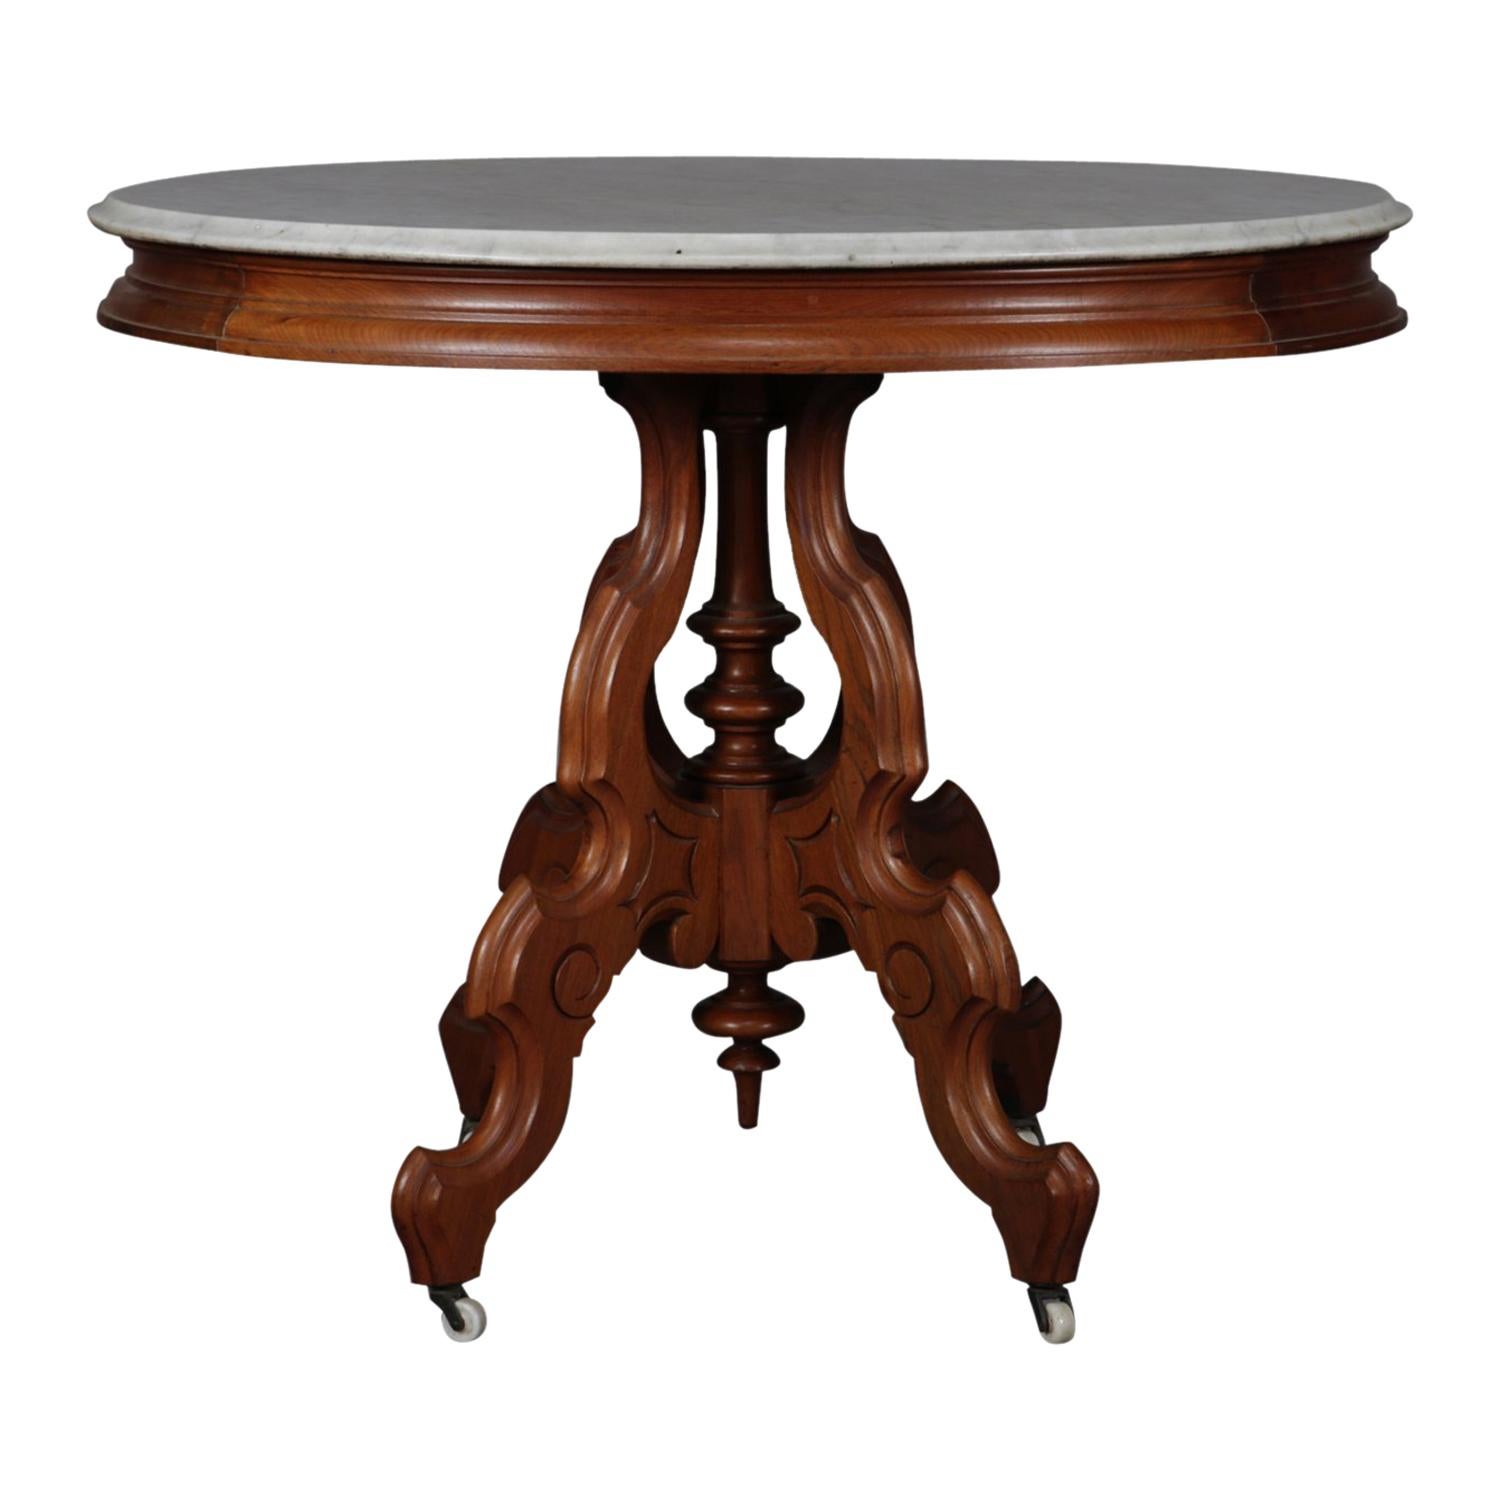 Victorian Carved Walnut Marble-Top Oval Center Table, circa 1890